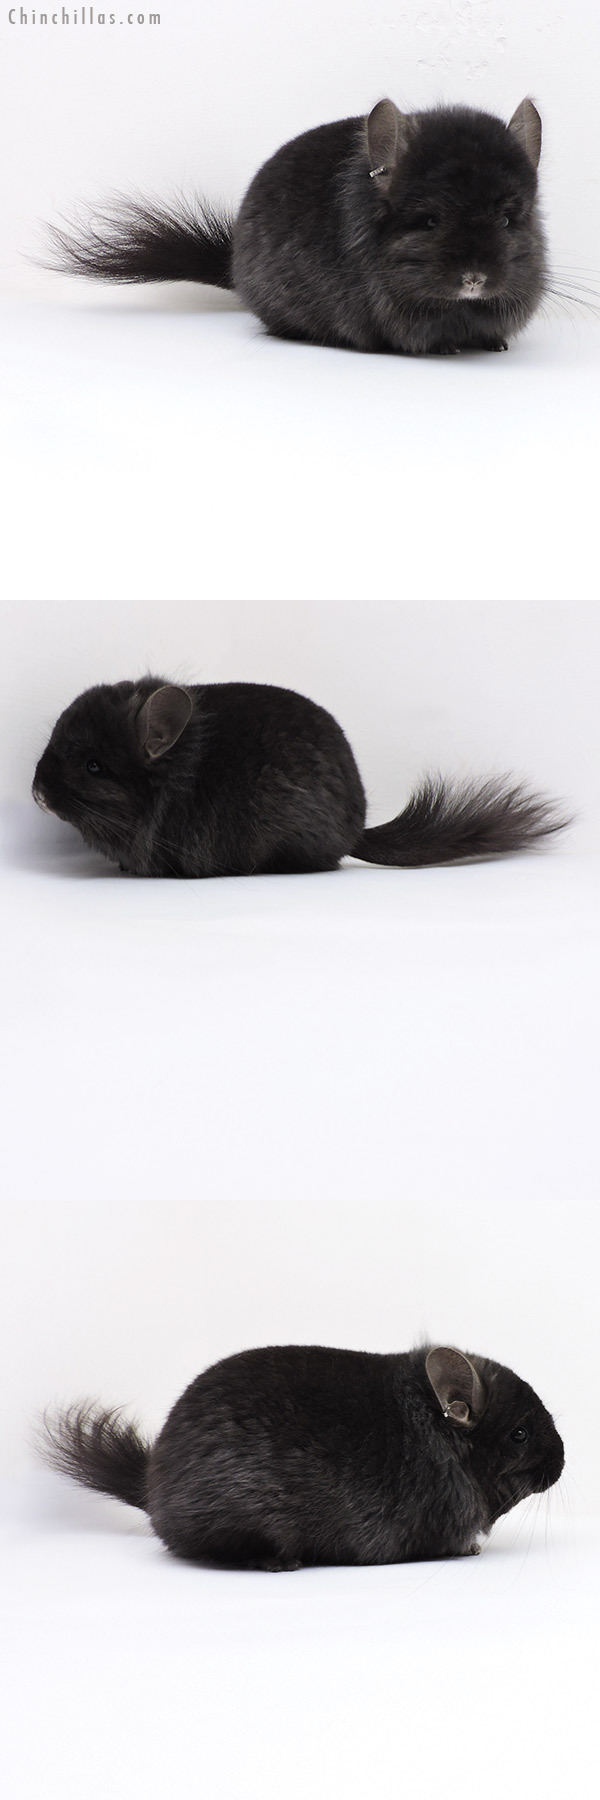 Chinchilla or related item offered for sale or export on Chinchillas.com - 18031 Exceptional Large Ebony  Royal Persian Angora ( Locken Carrier ) Male Chinchilla with Lion Mane